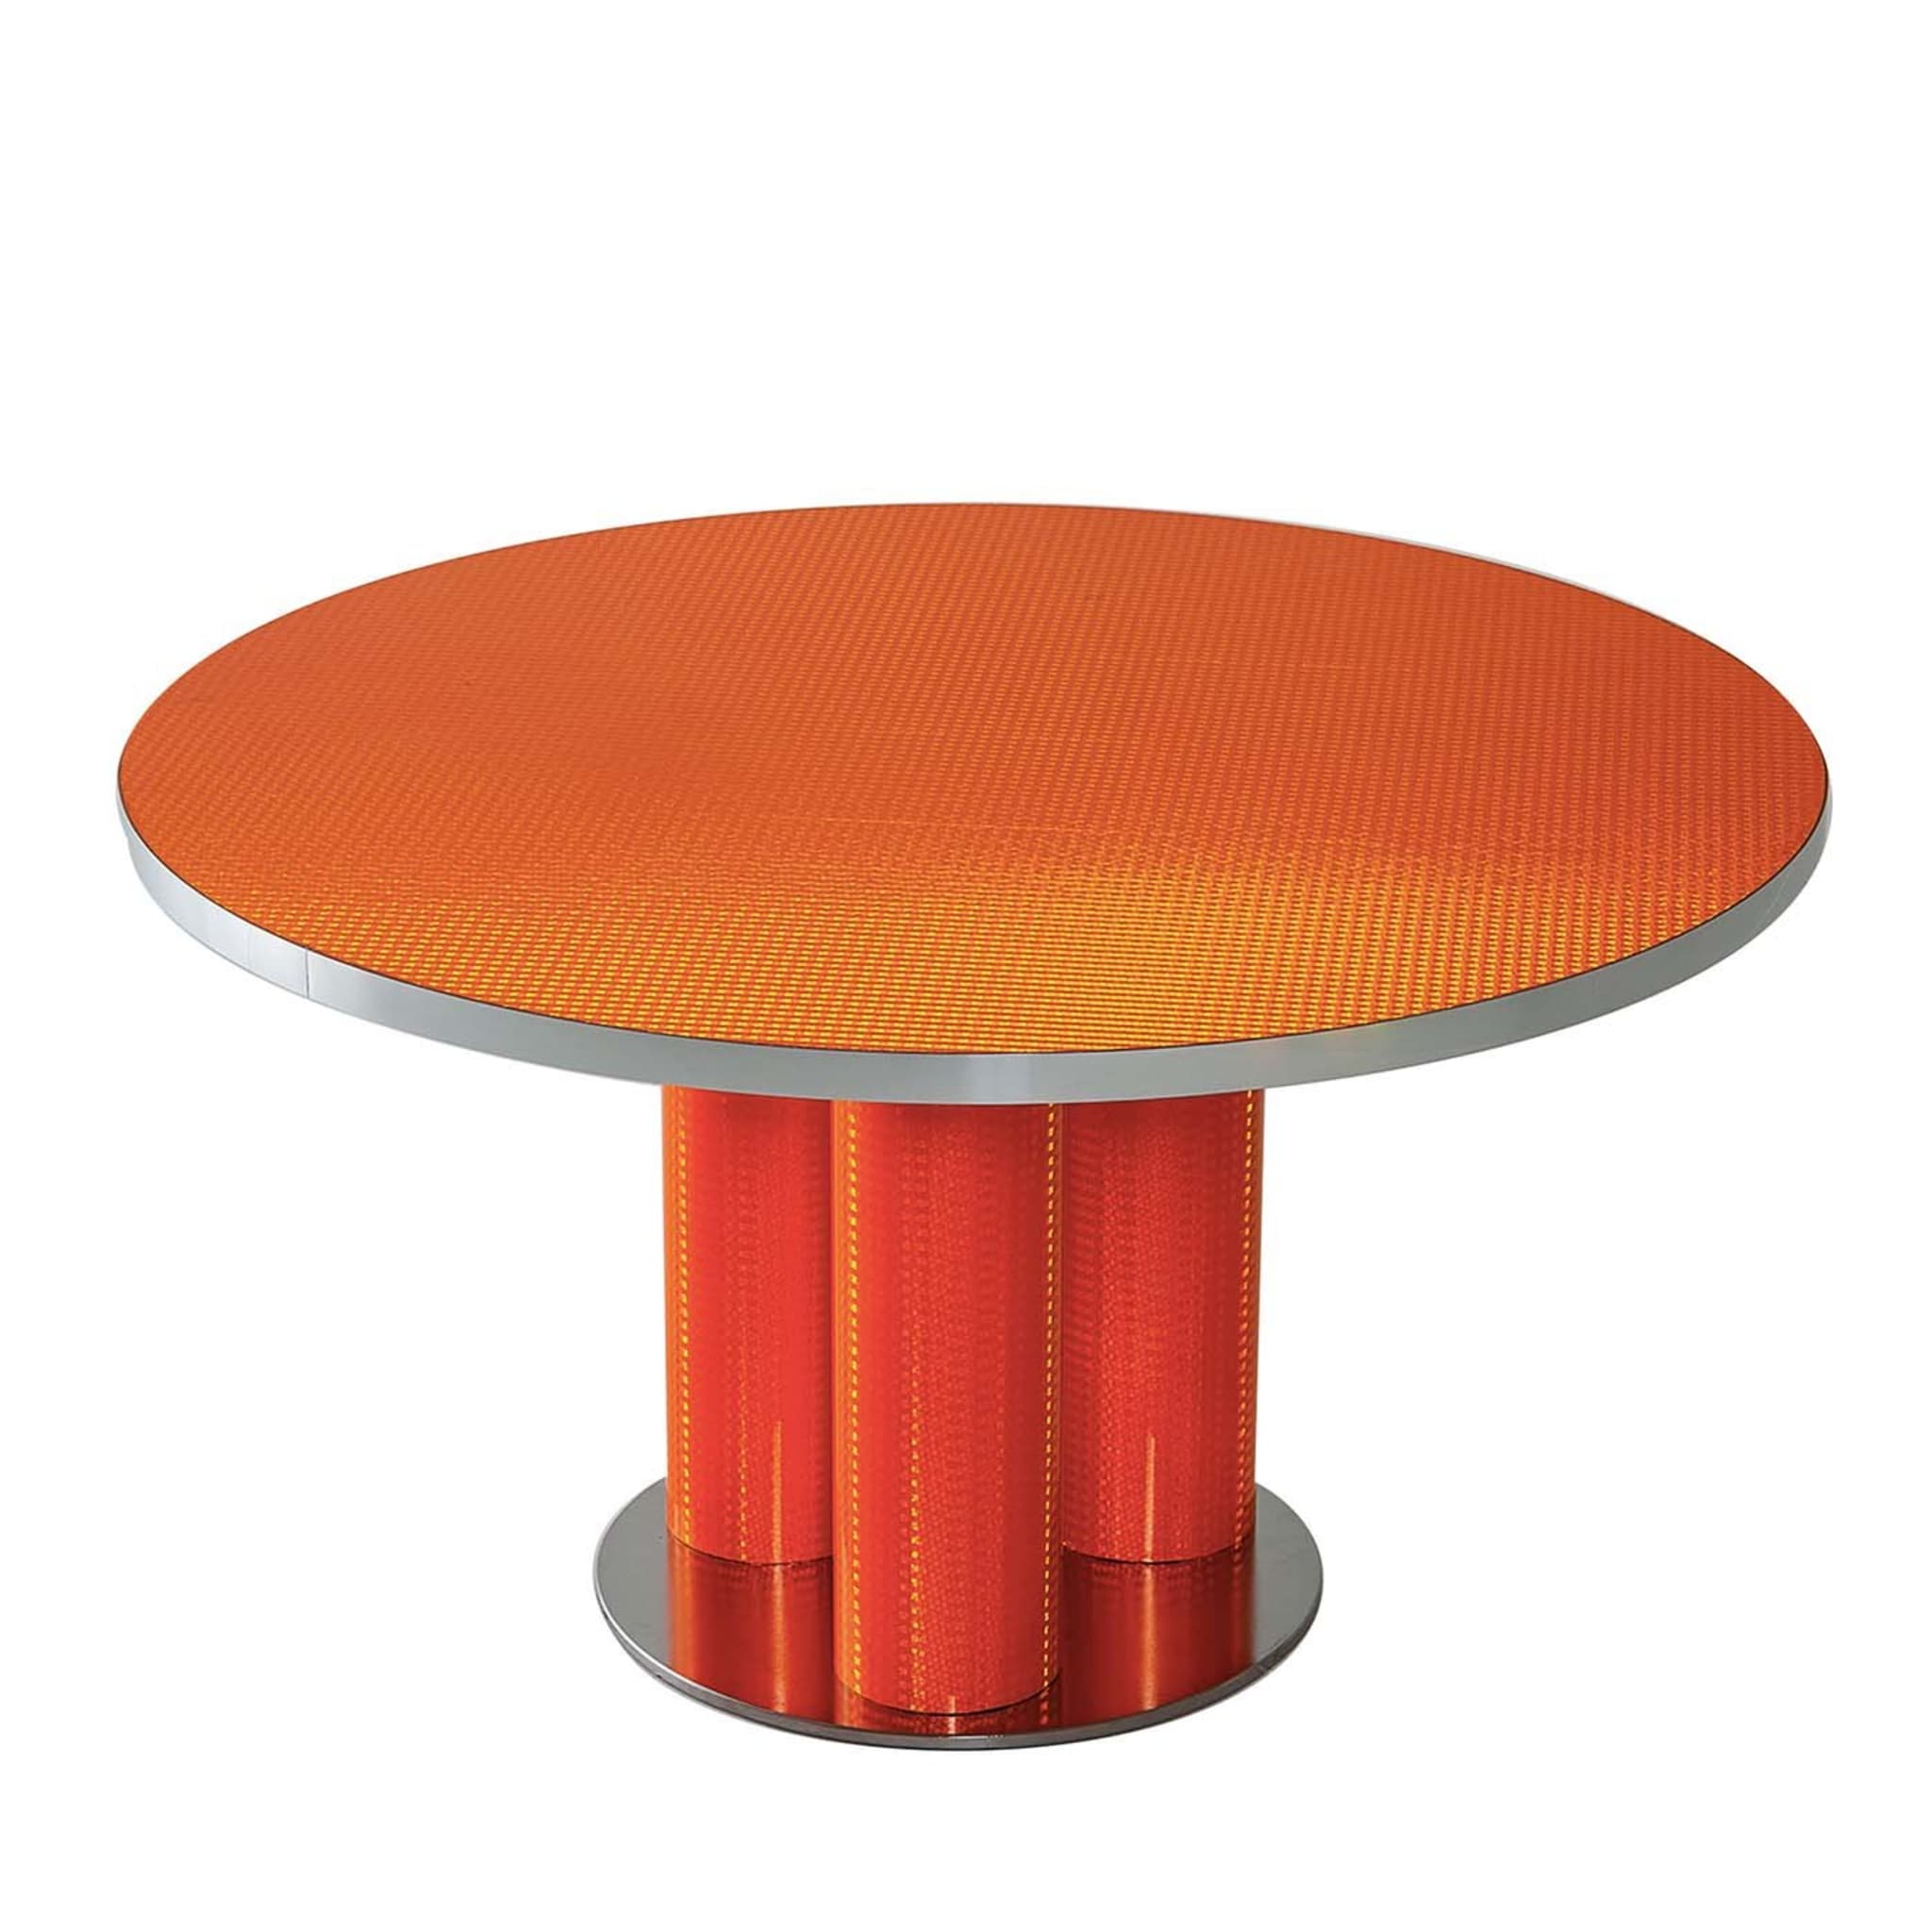 Reflective Collection - Red round coffee table - Main view